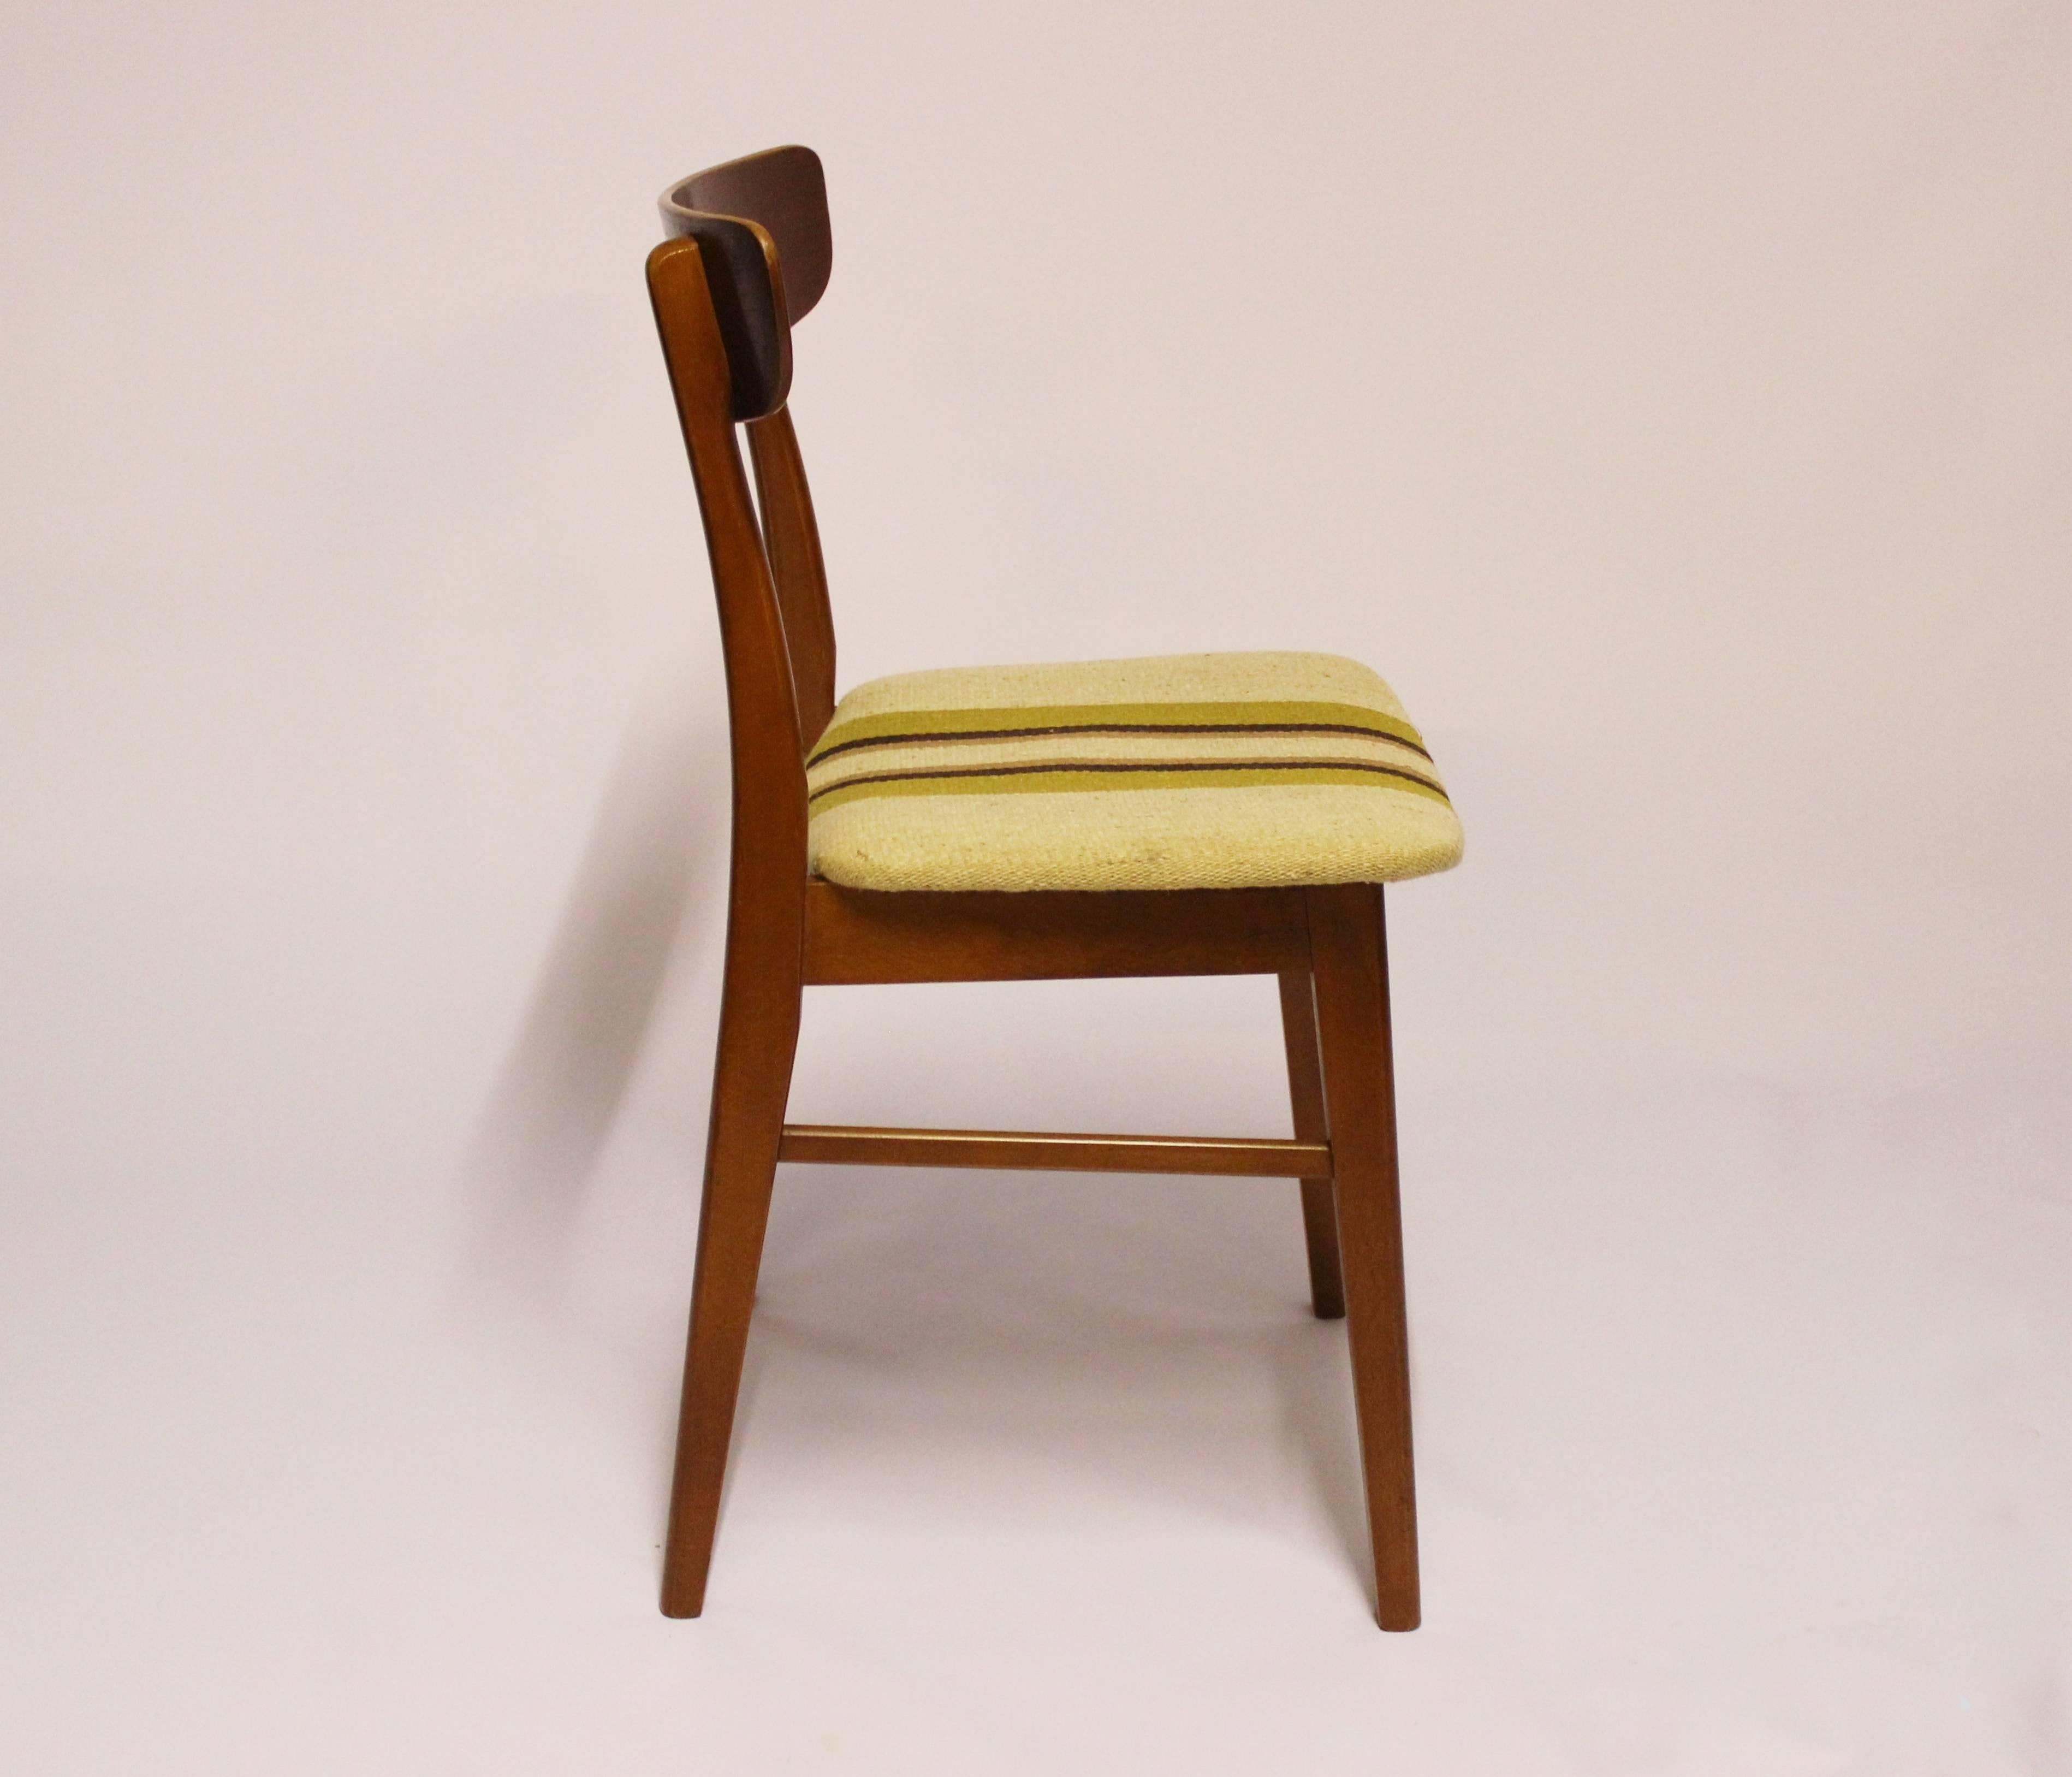 Danish Scandinavian Modern Set of Six Dining Chairs in Teak from the 1960s For Sale